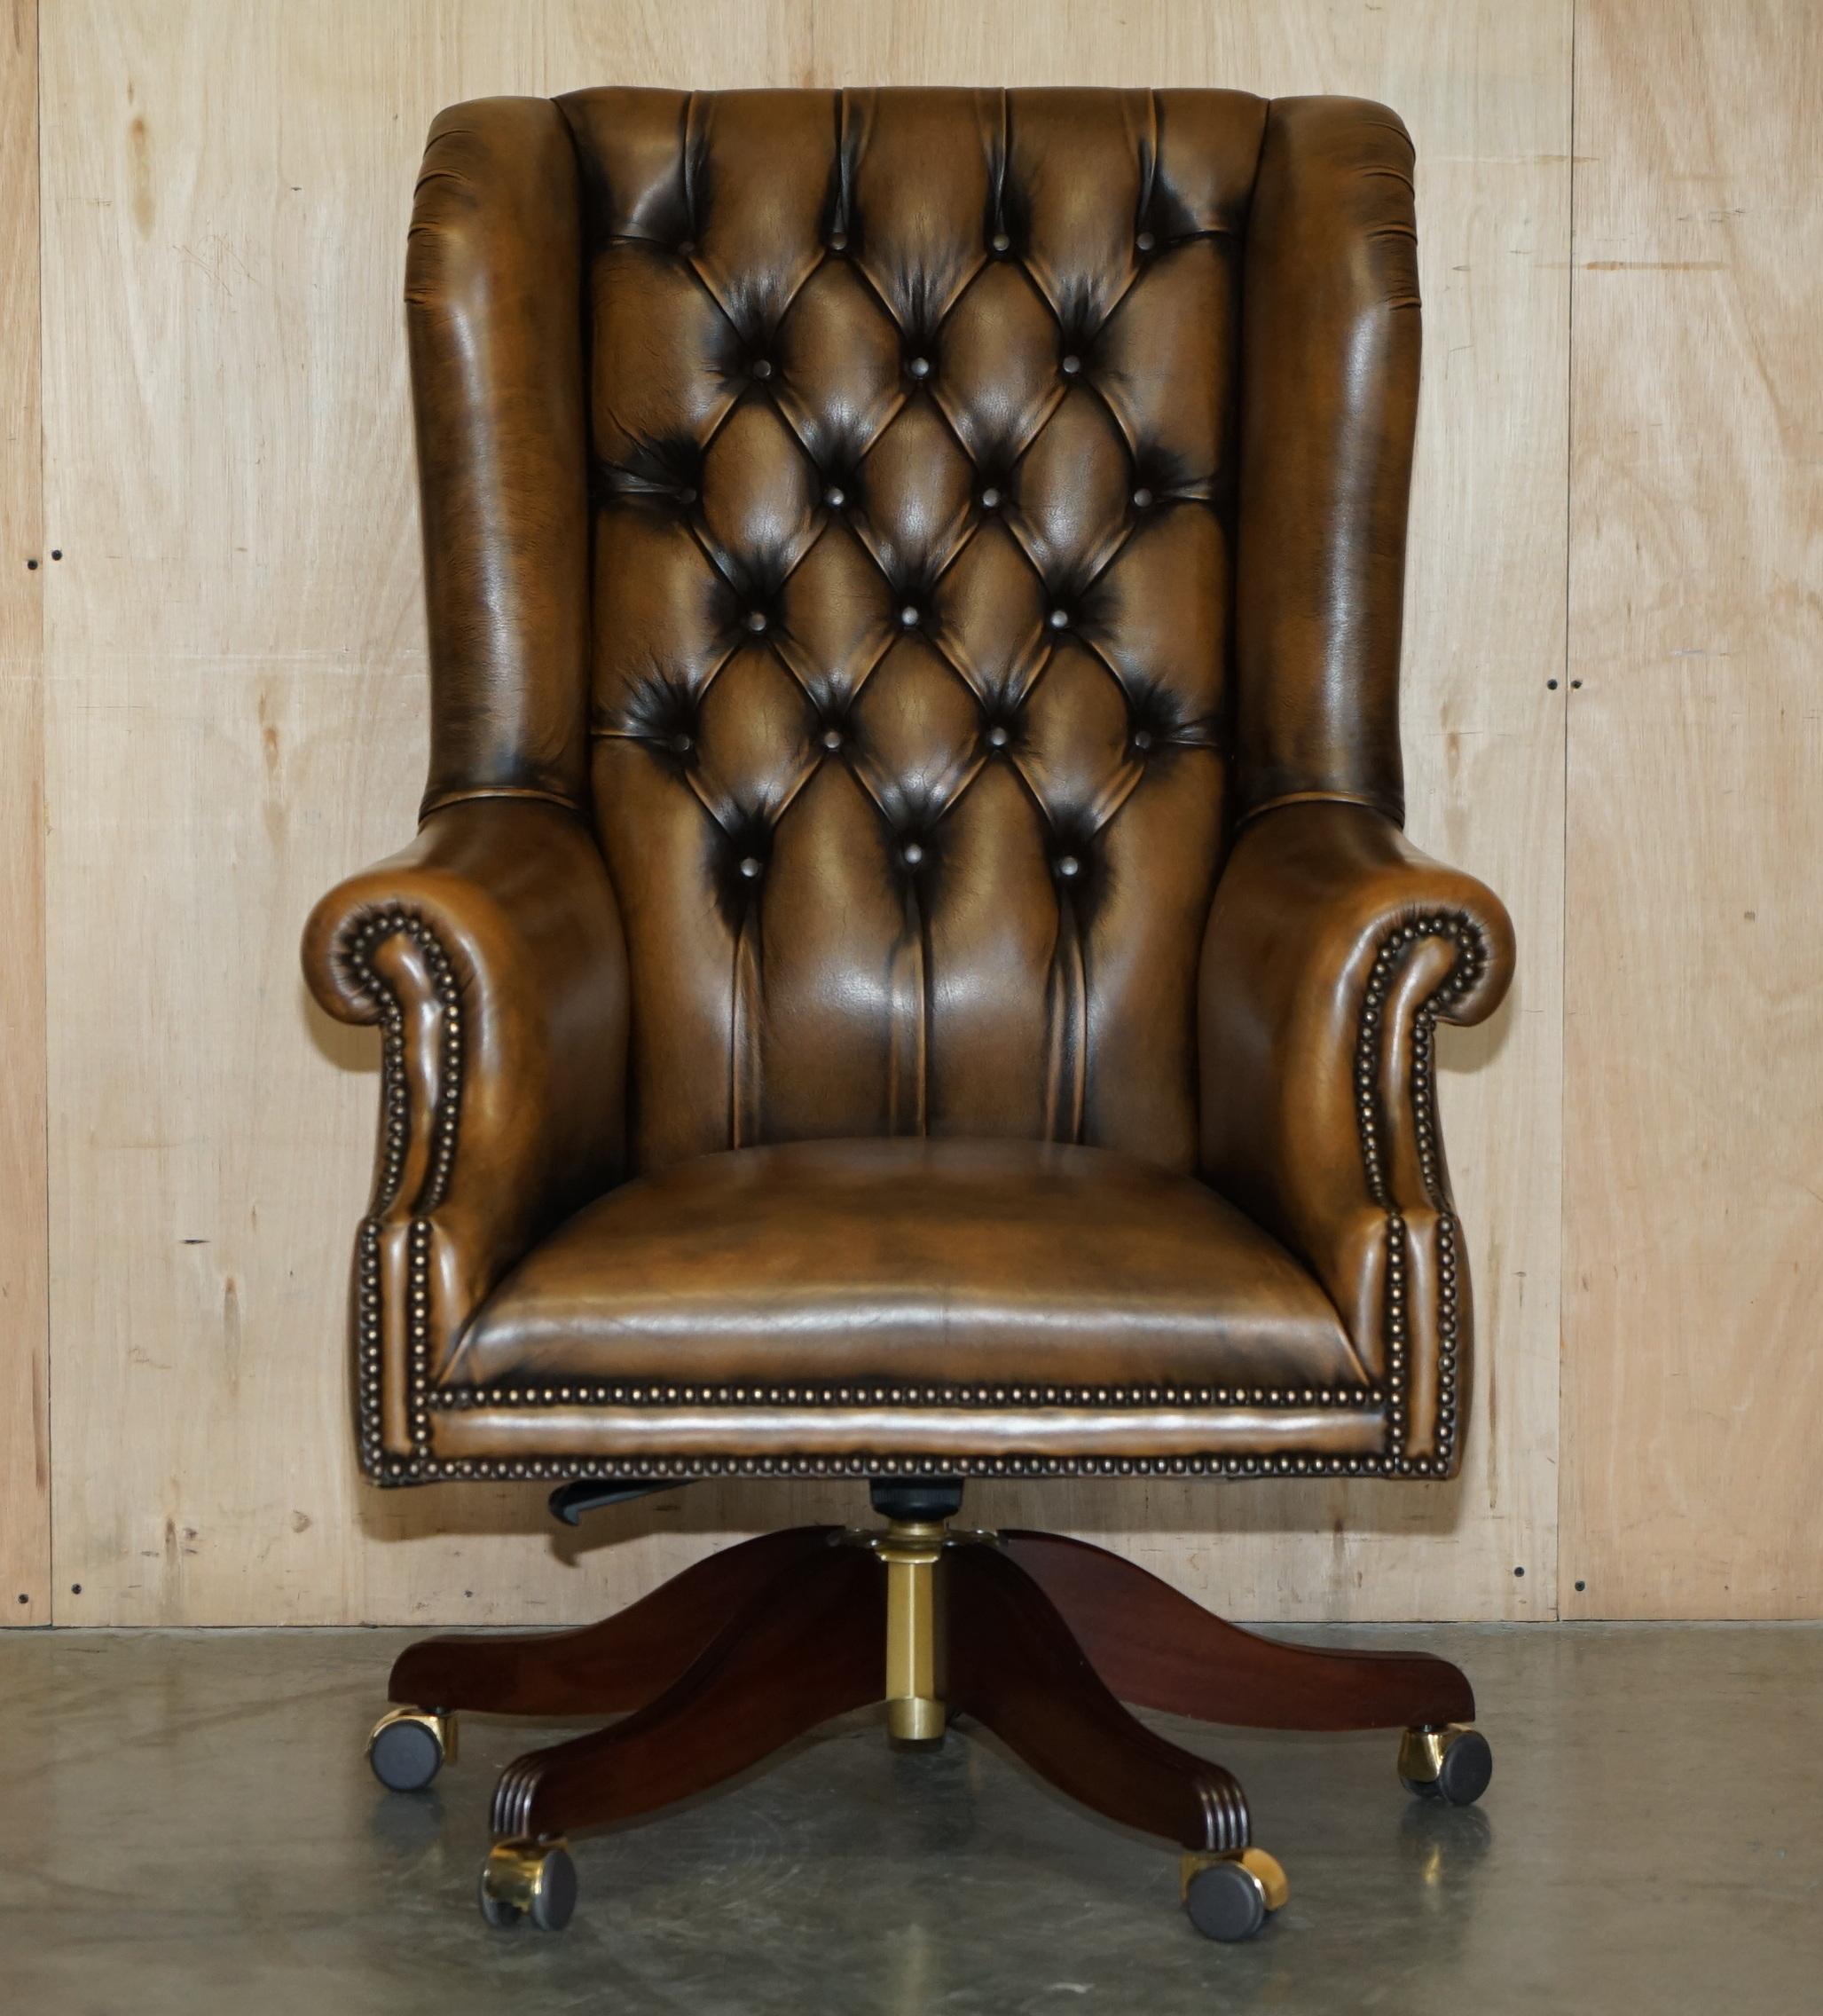 Royal House Antiques

Royal House Antiques is delighted to offer for sale this stunning lightly restored hand dyed cigar brown leather very large Chesterfield Wingback office chair with original leather and patina.

Please note the delivery fee